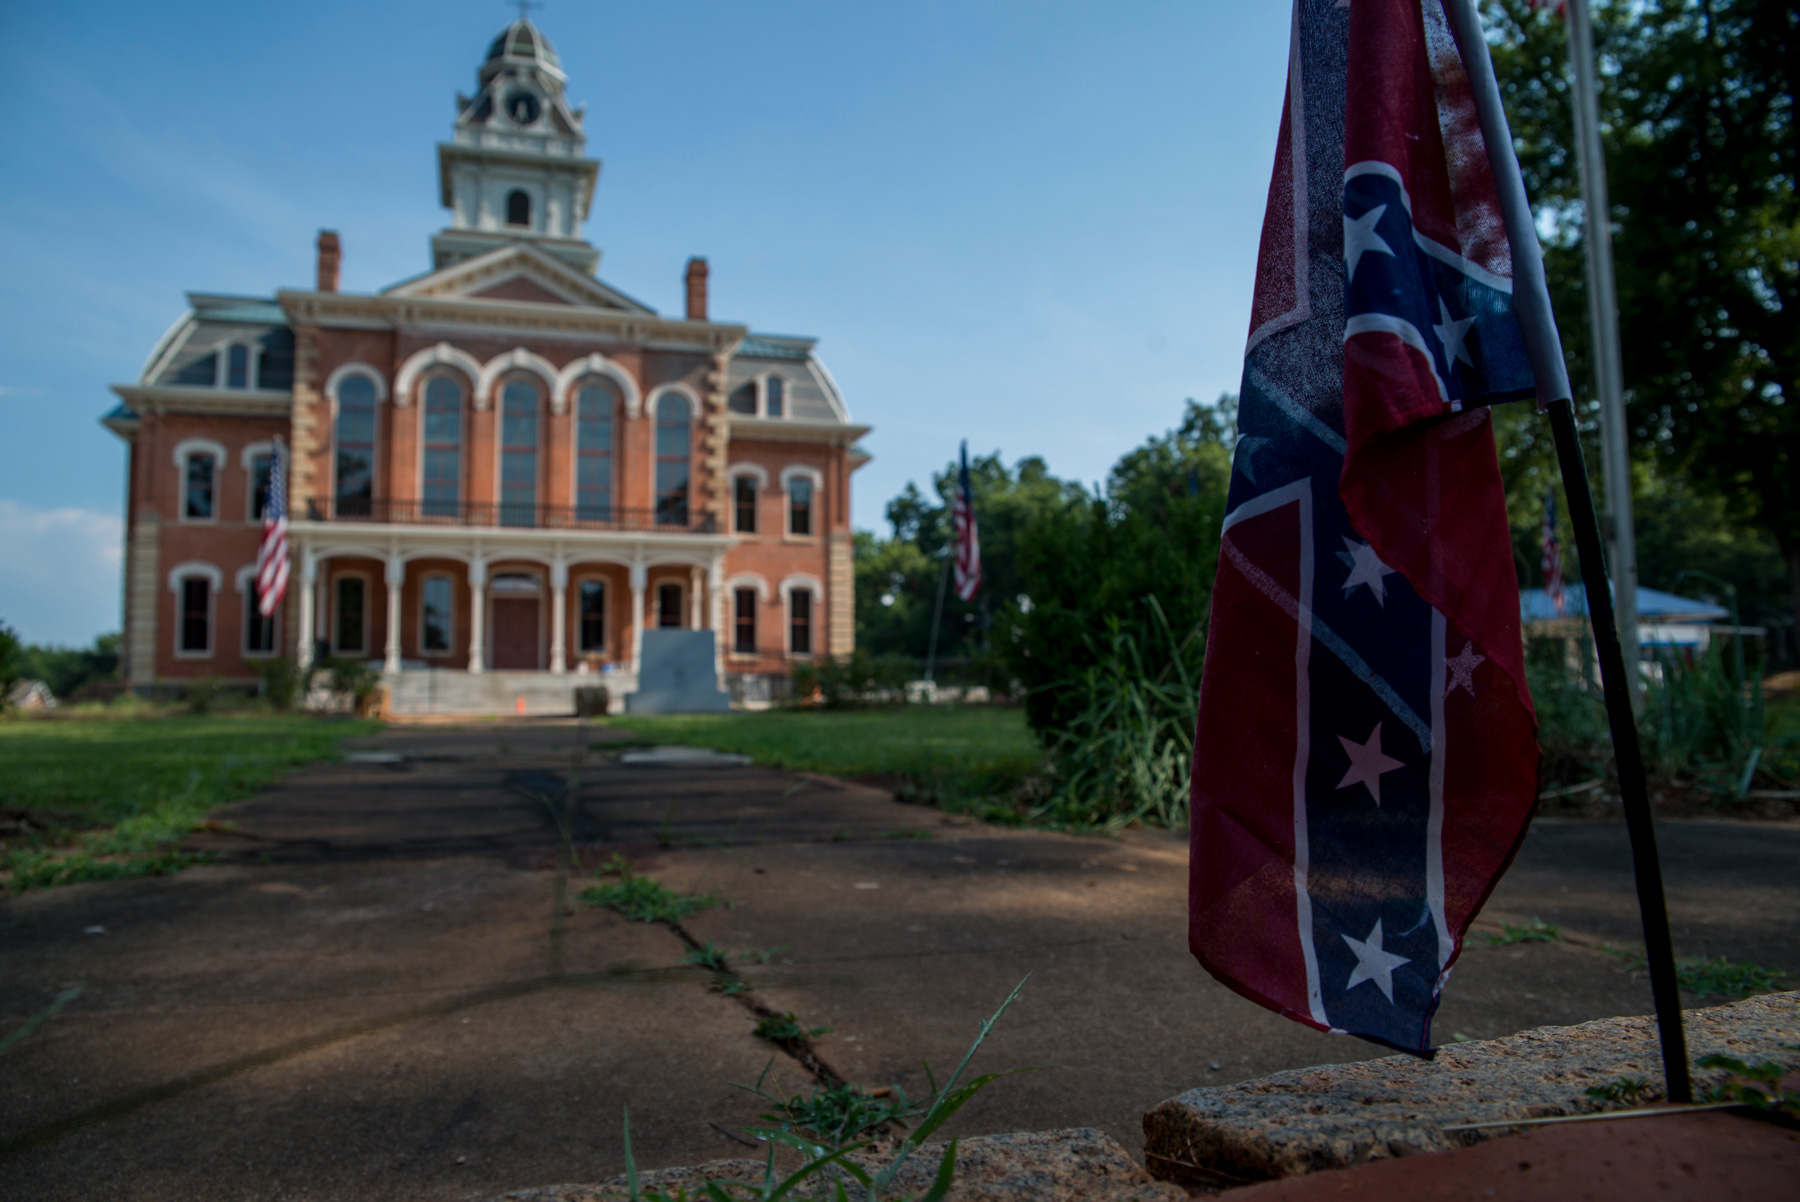 The Hancock County courthouse is in the county seat of Sparta, Georgia. Across from the courthouse a Confederate flag is wedged into the bricks of the Civil War memorial dedicated to those who served in the Confederacy. Sparta’s population is nearly 80 percent black. (Roman Knertser/News21)